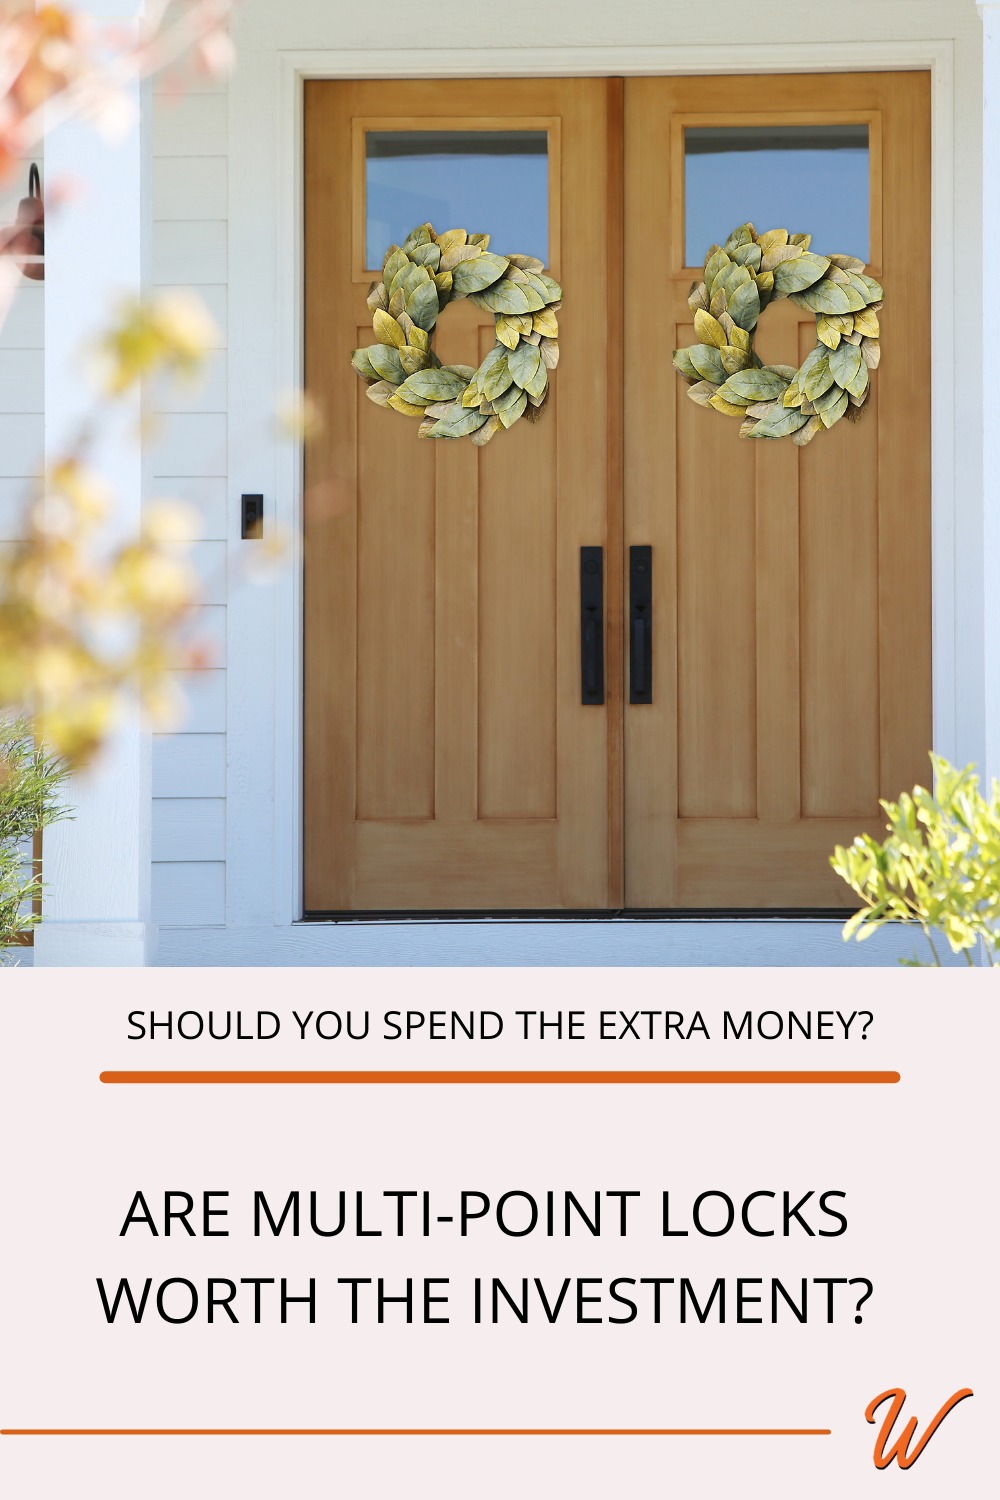 Modern double door front doors with oil rubbed bronze handles captioned with "Should you spend the extra money? Are multipoint locks worth the investment?